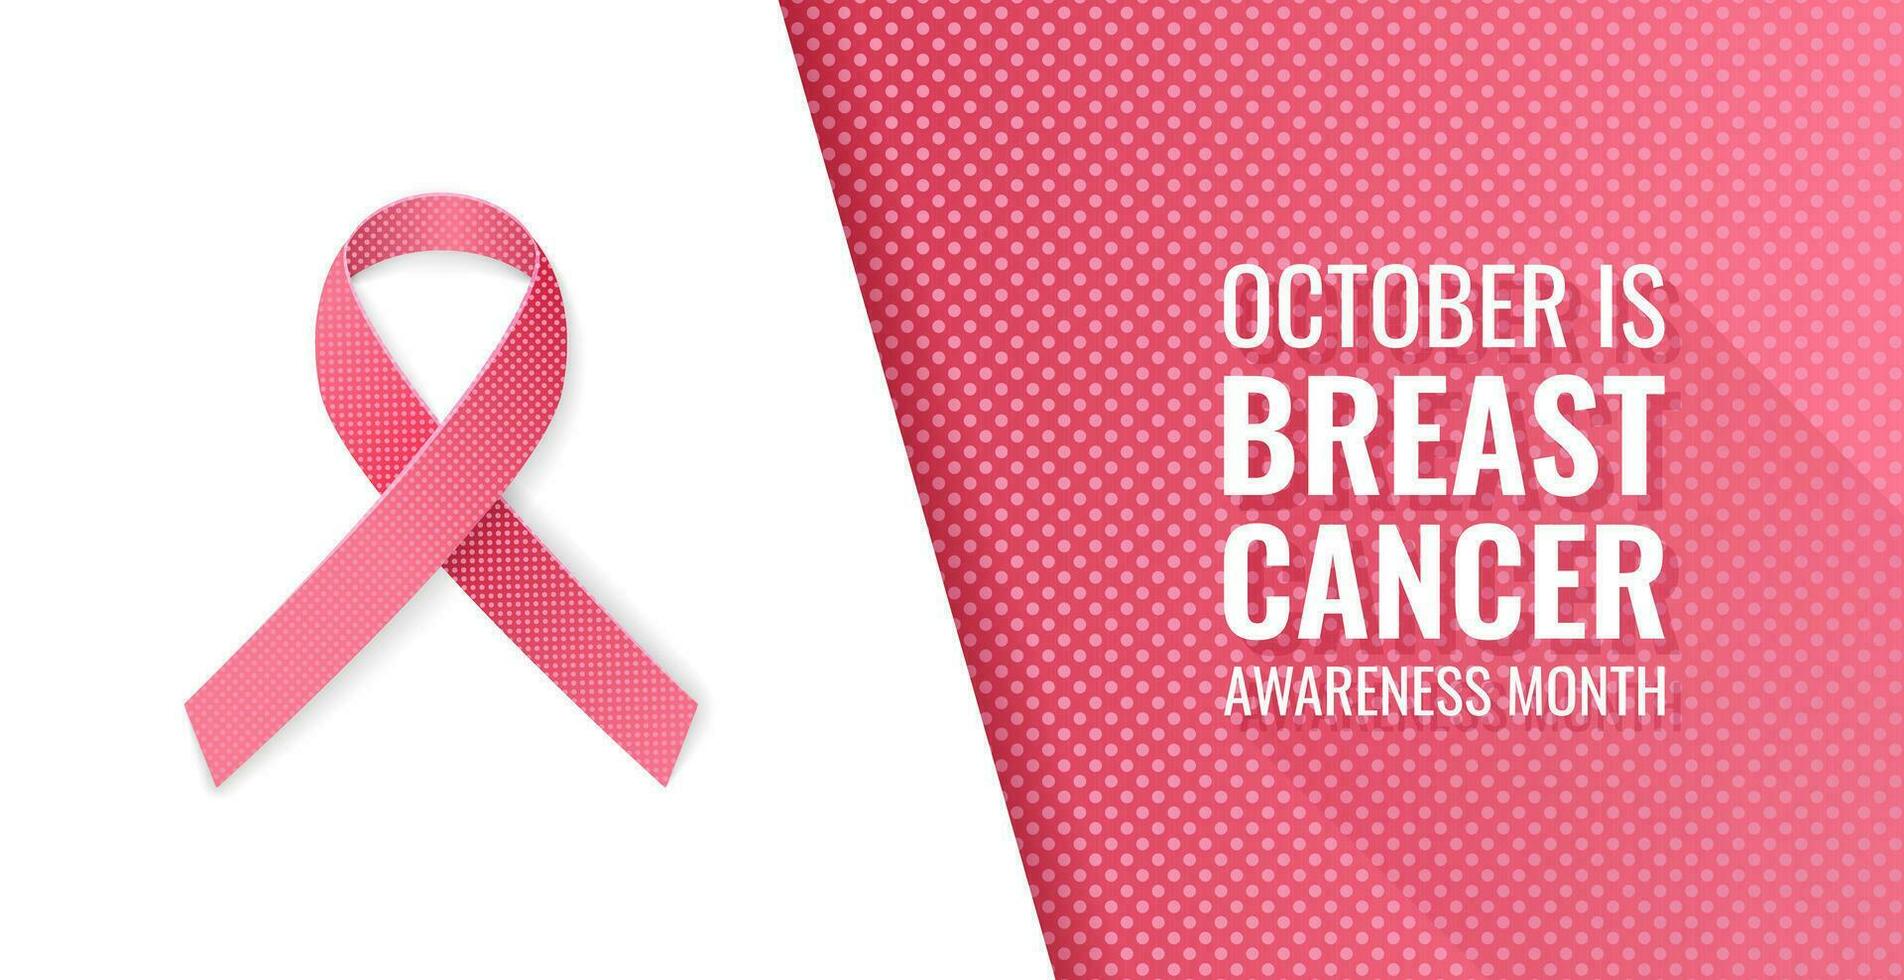 Realistic pink ribbon with shadow isolated on background. Symbol of international breast cancer awareness month in October. Vector art. Modern web banner with ribbon sign and polka dot pattern.